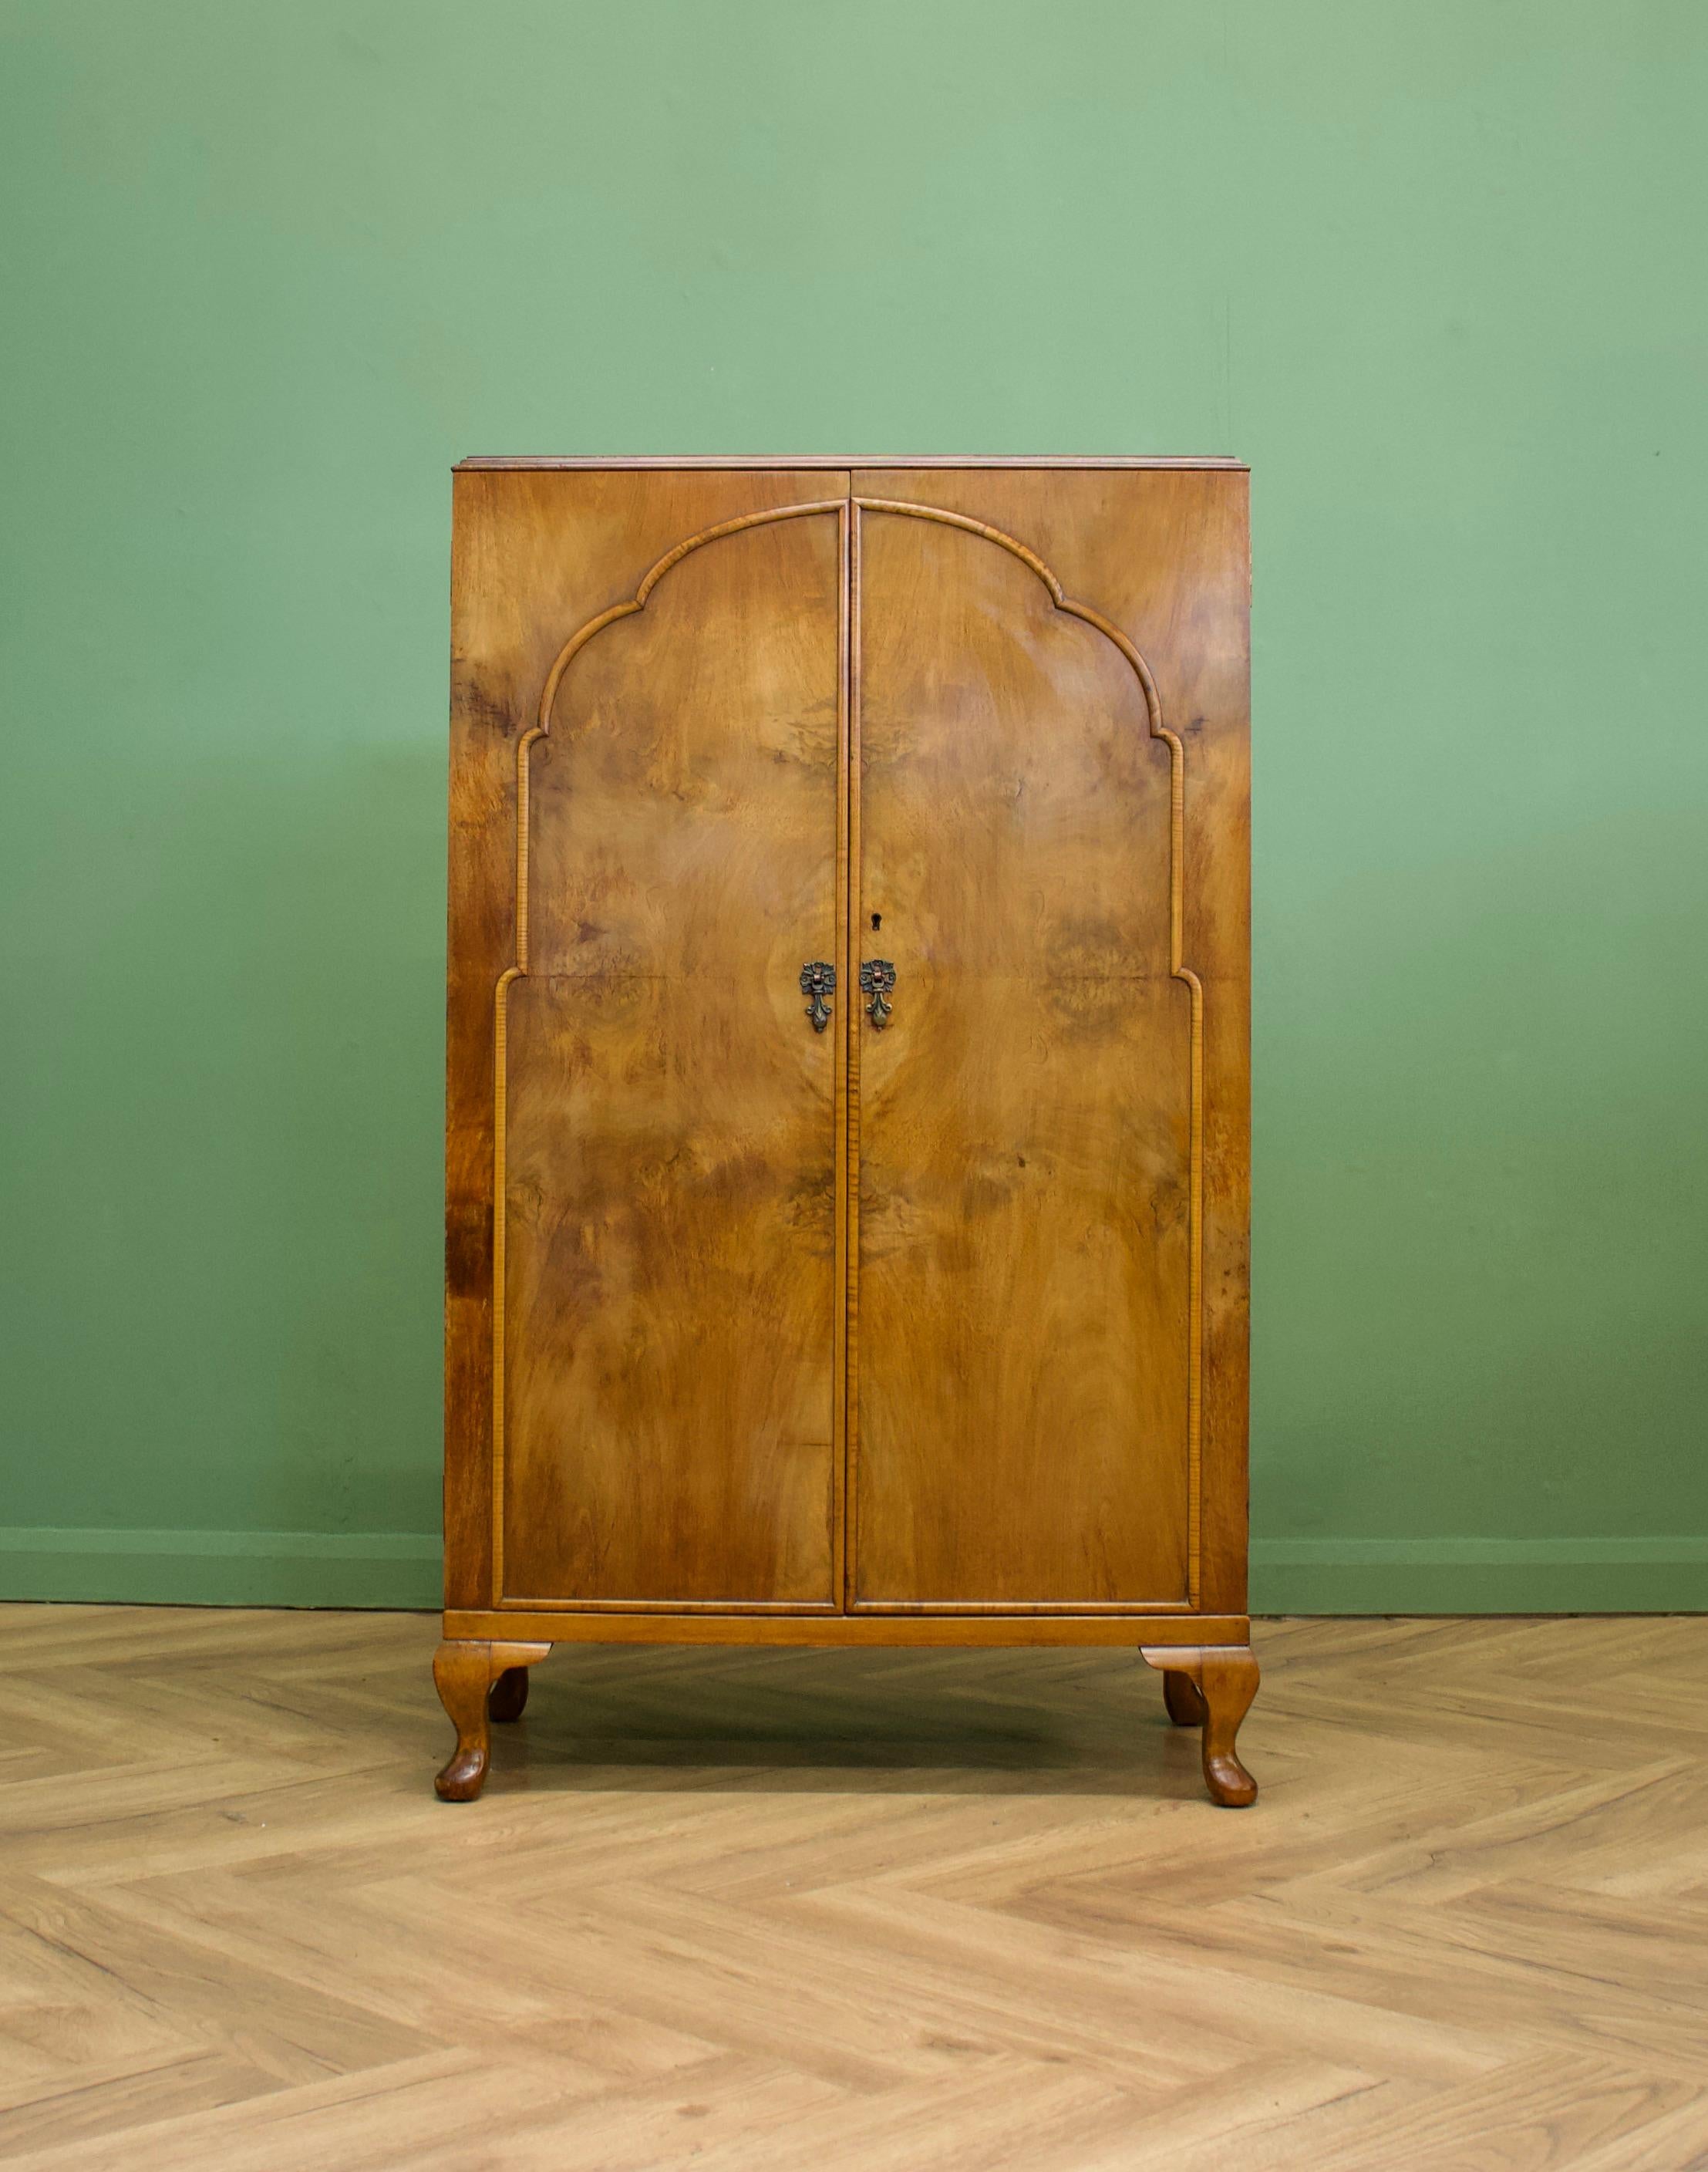 - Art Deco tallboy or linen cabinet
- Made from walnut and walnut veneer
- Made in the UK by Waring and Gillow during the 1930s.